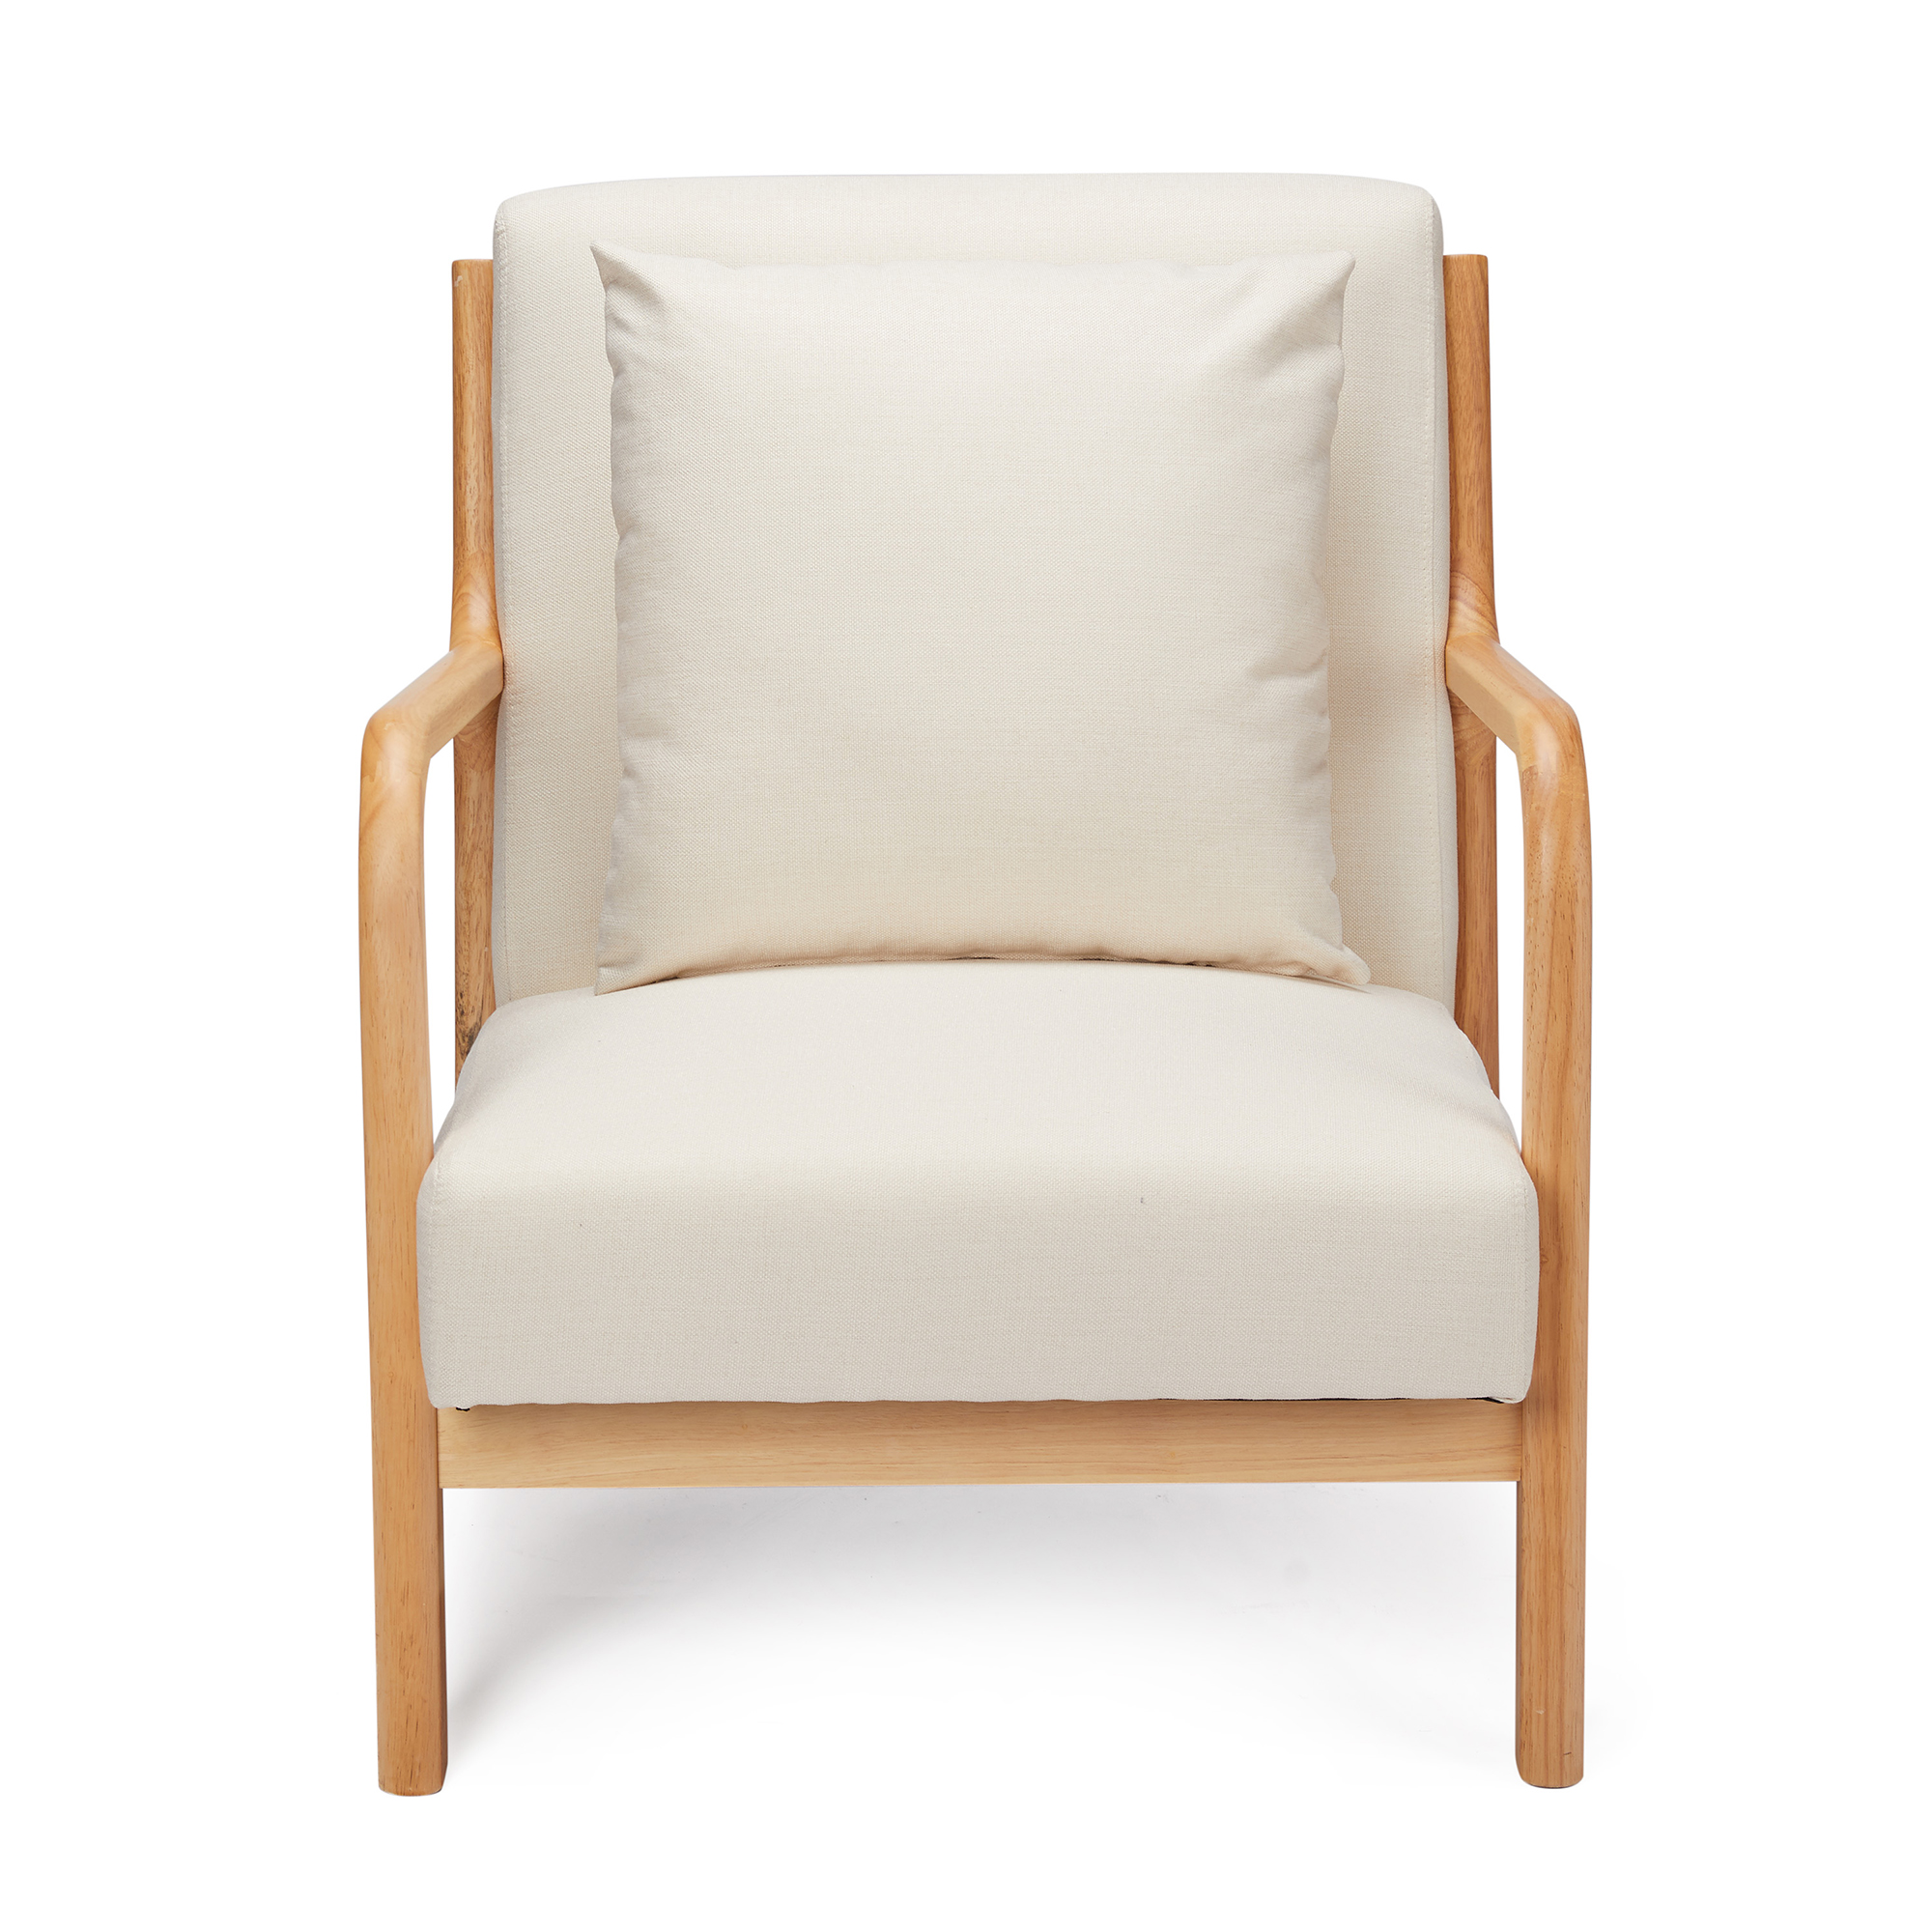 Jomeed Oak Wood Frame Mid Century Modern Accent Chair for Living Room - image 5 of 6